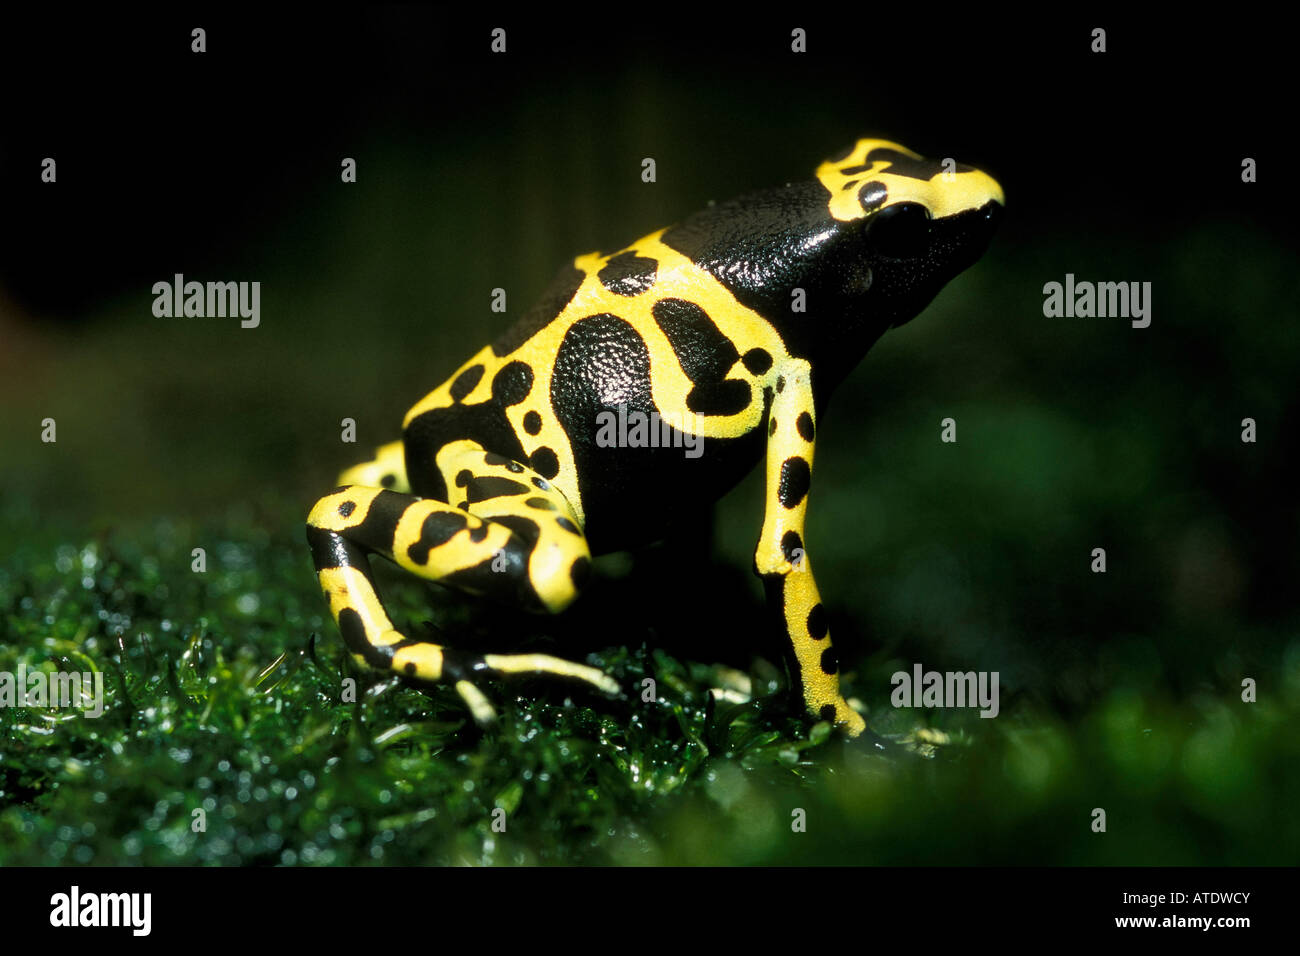 Poison arrow frog Dendrobates auratus Central and South America c Stock Photo